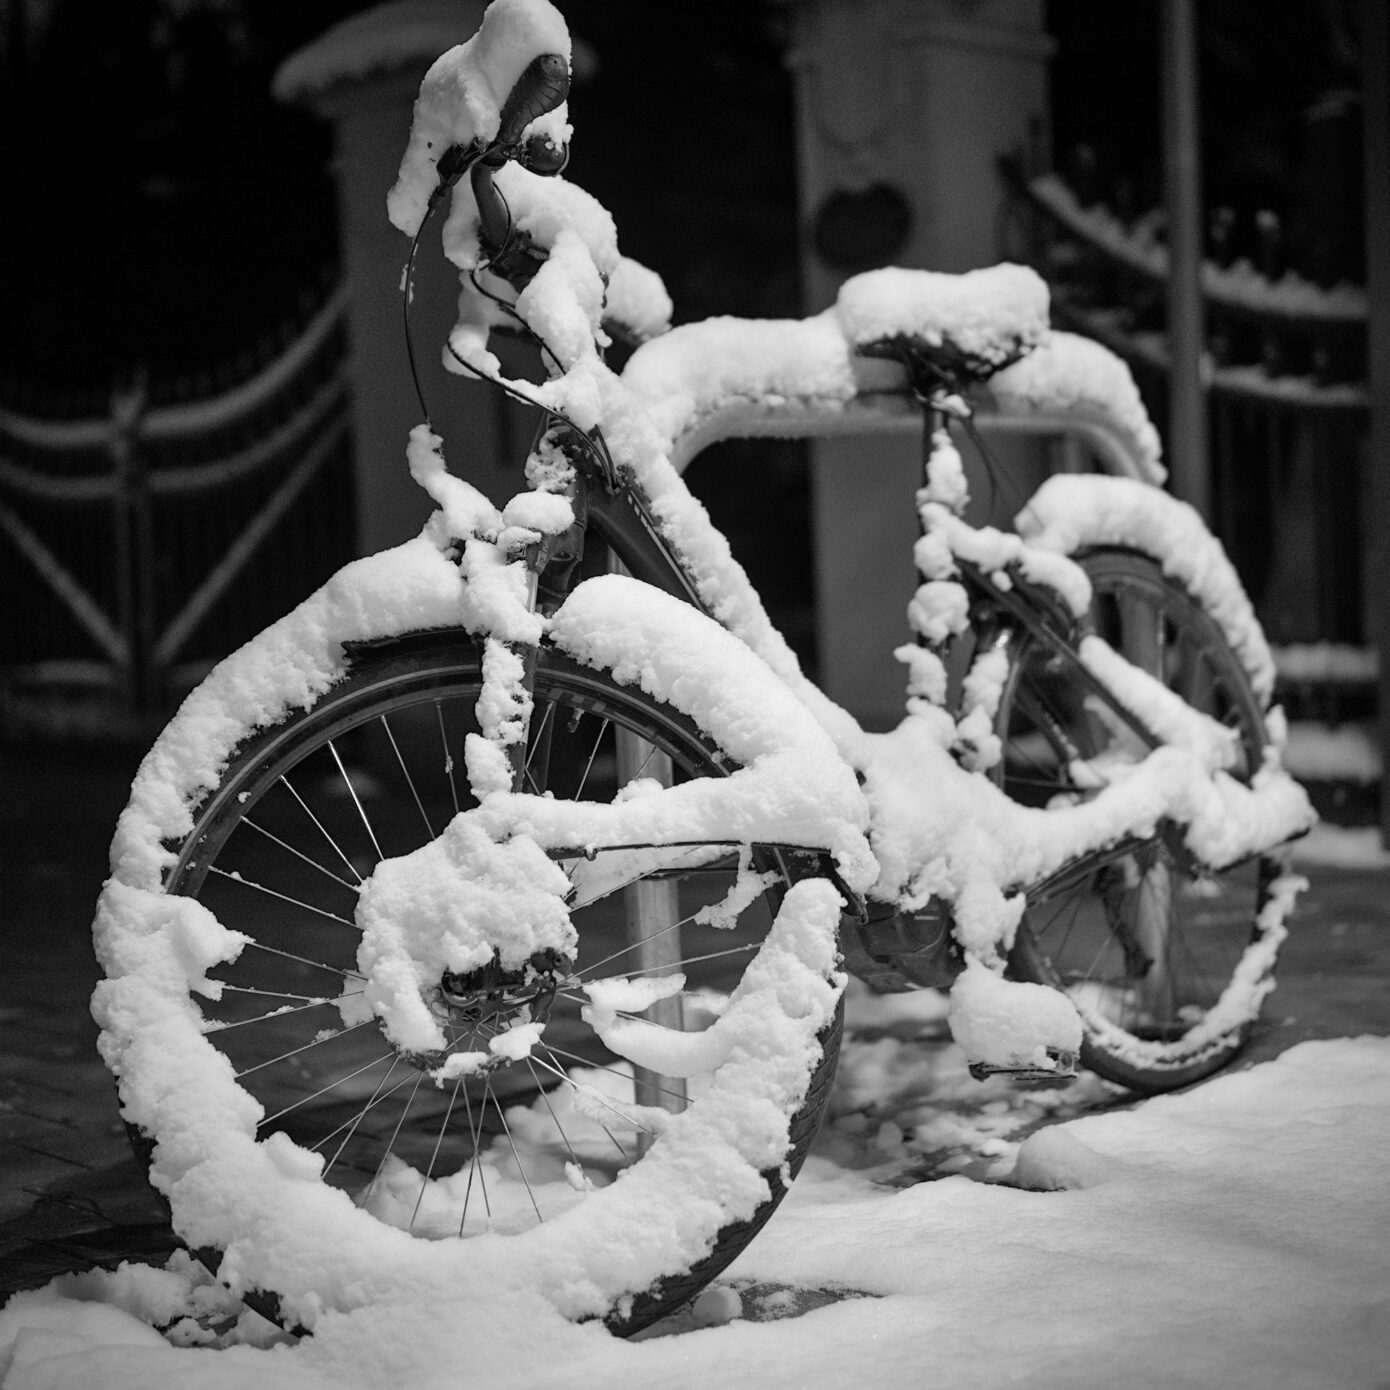 Bicycle_for_a_Snowman.jpg